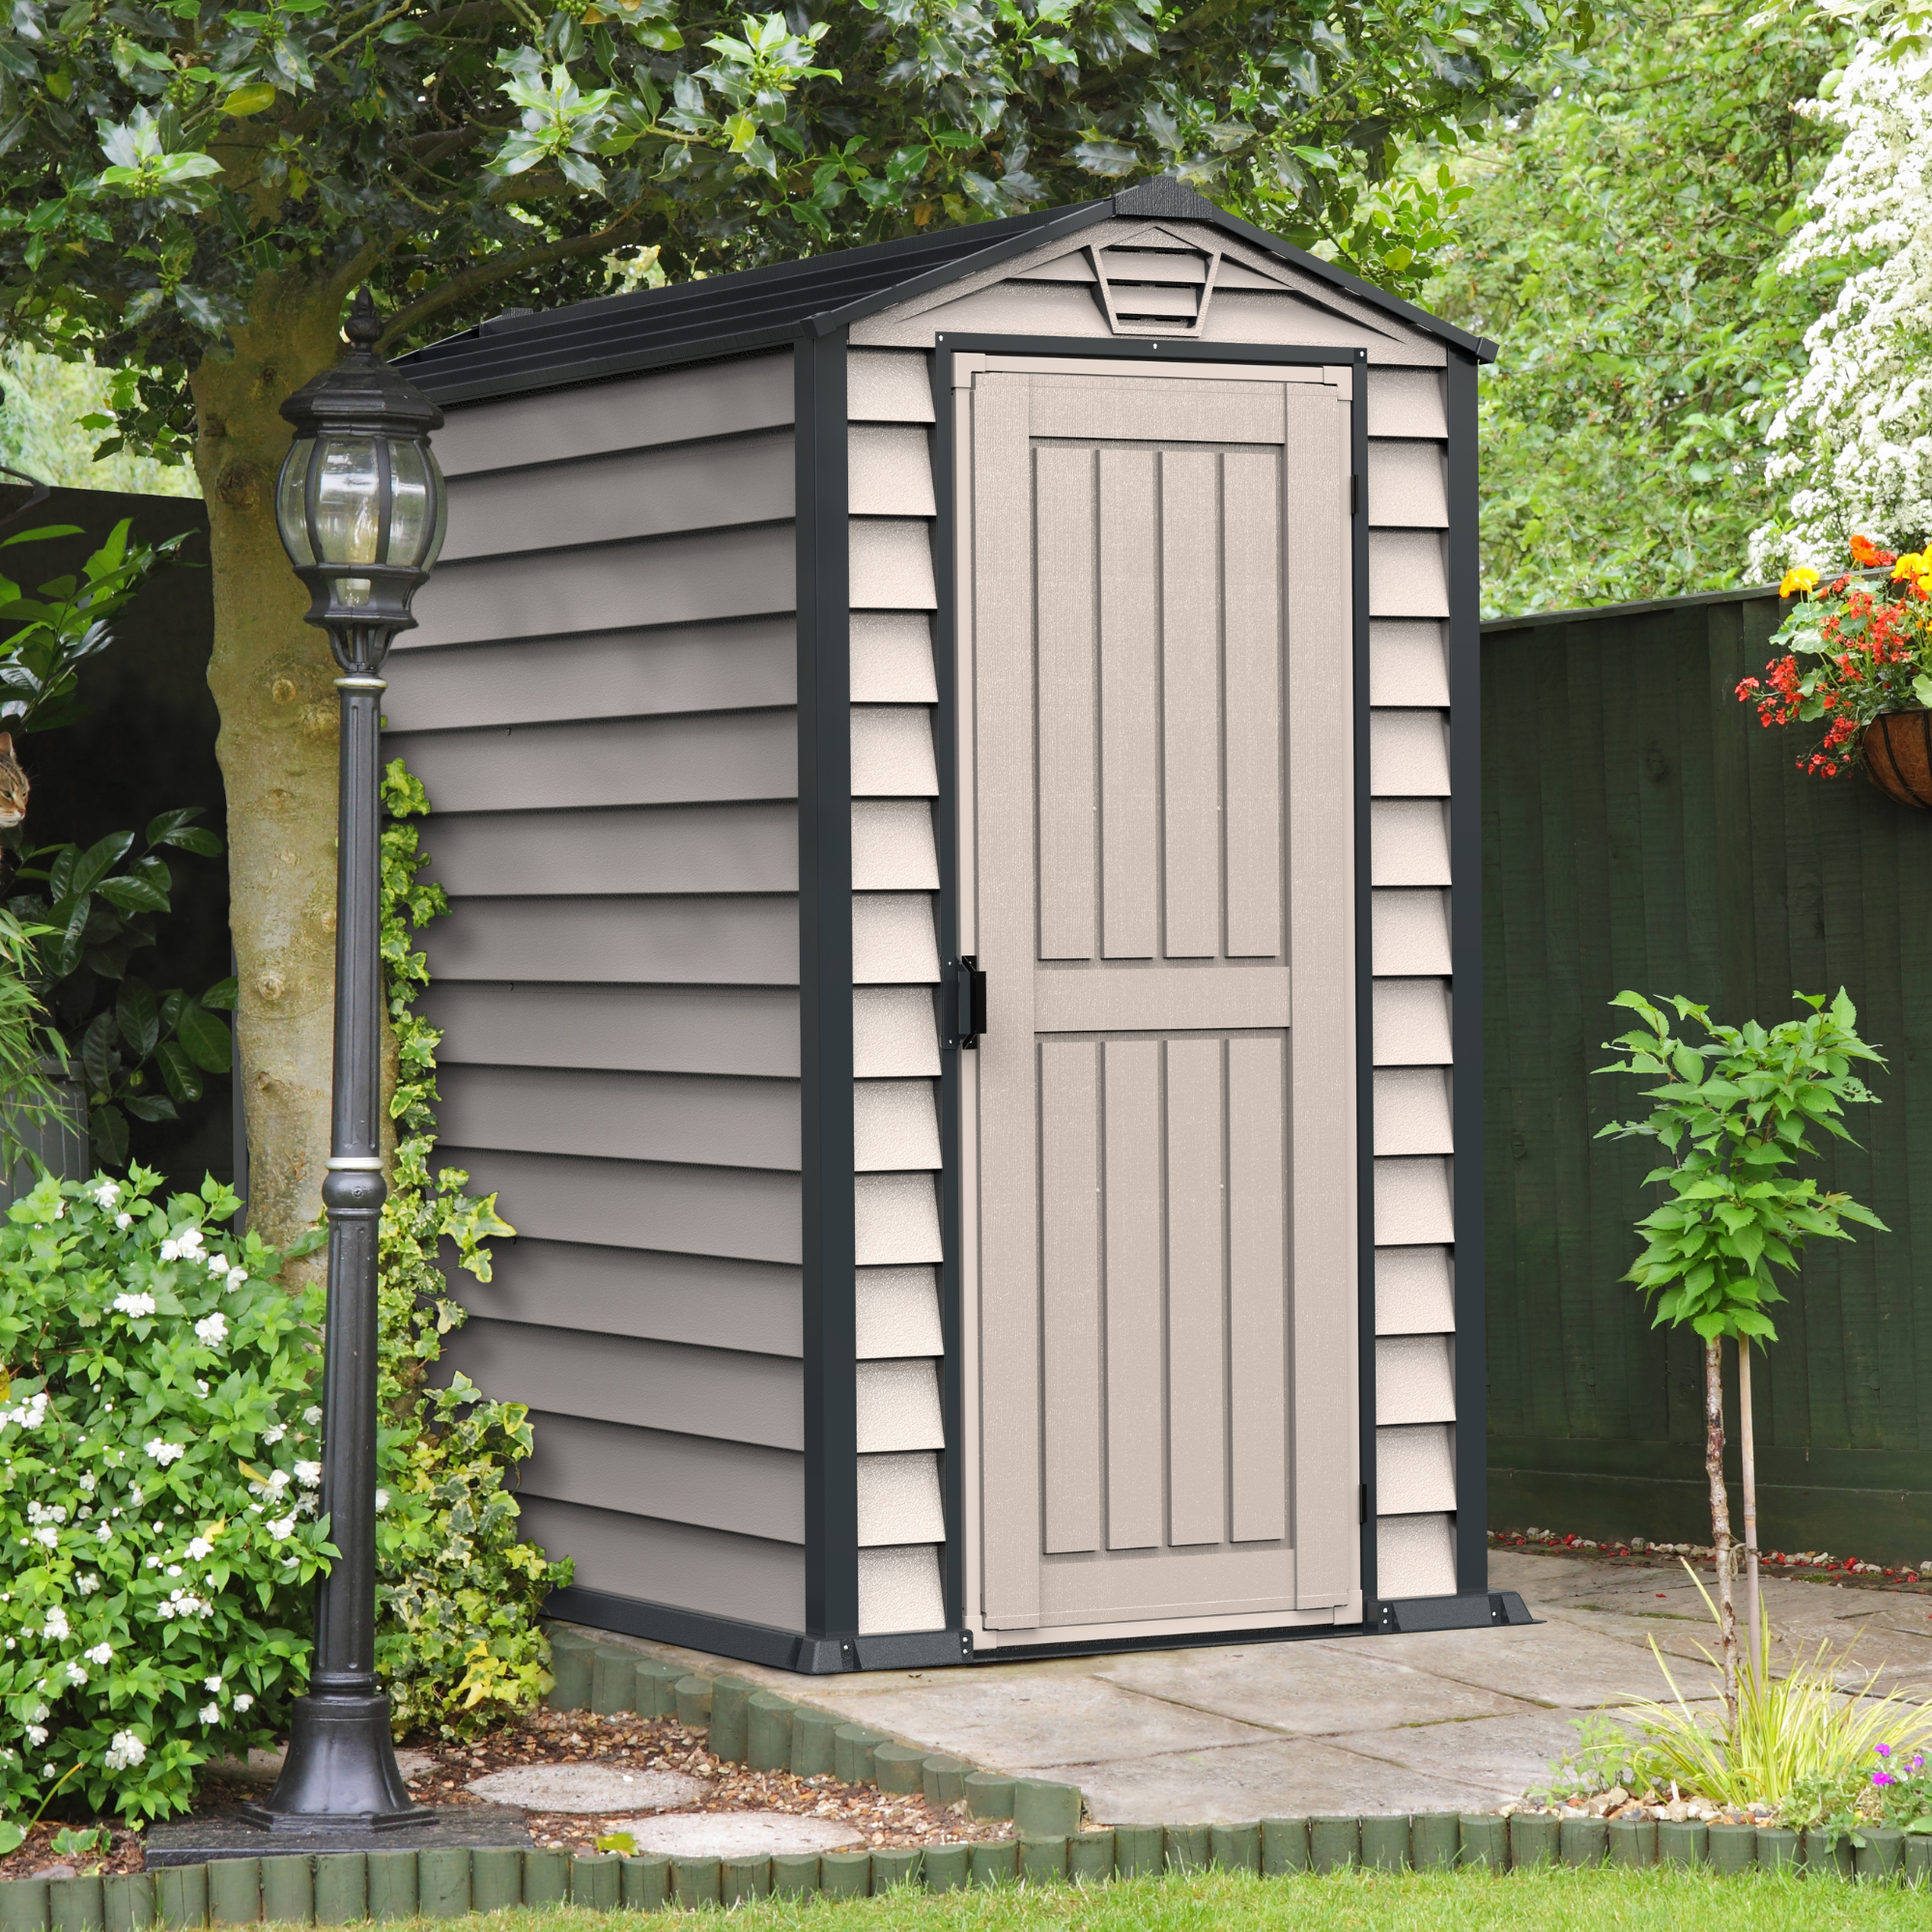 BillyOh EverMore 4x6ft Apex Plastic Shed - 4x6ft